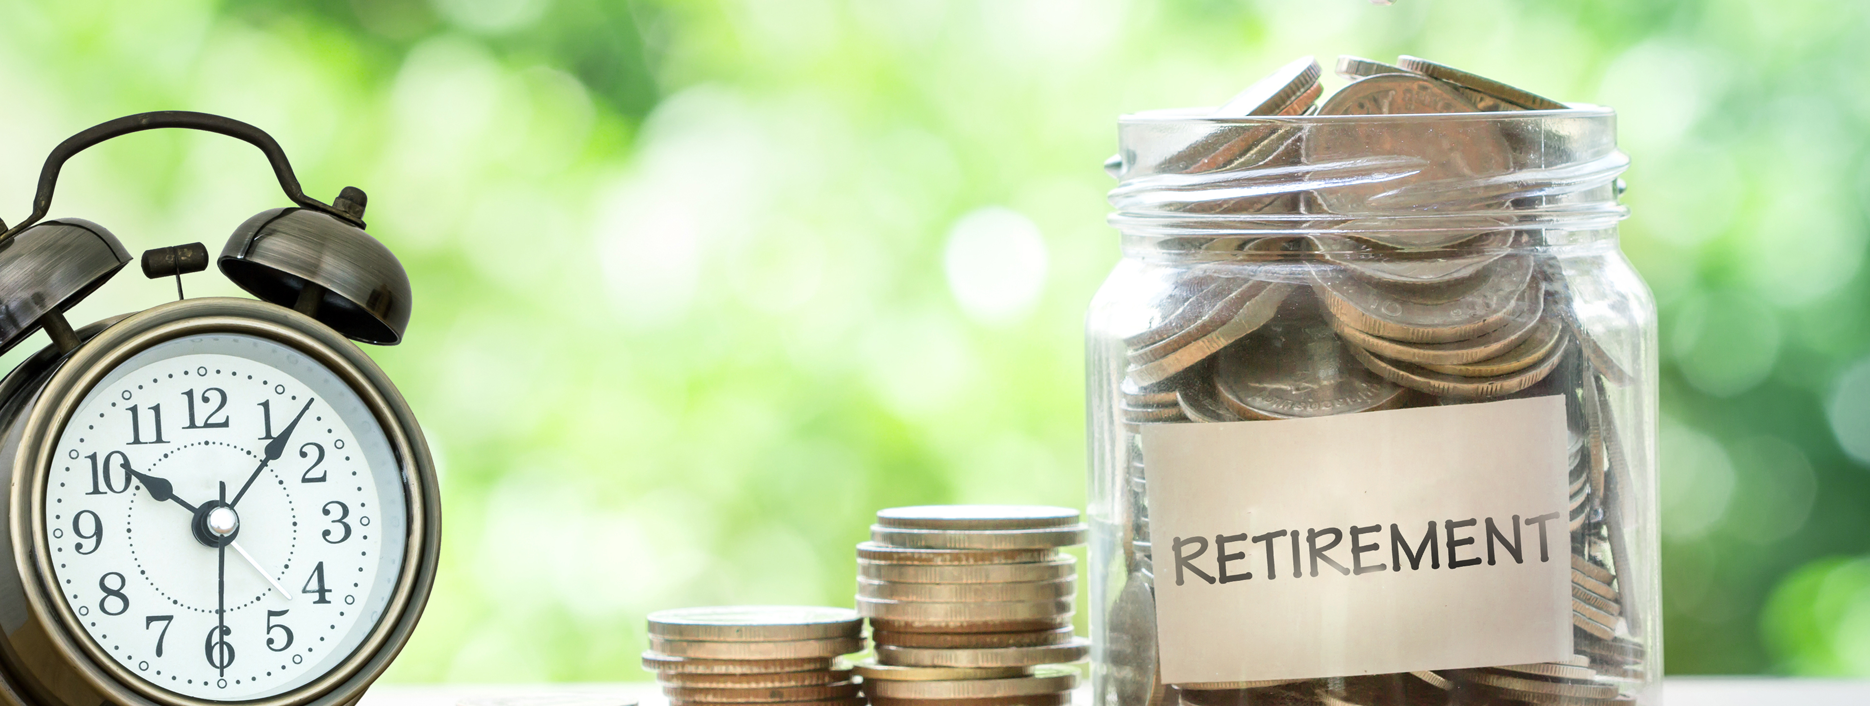 Are we saving enough for Retirement?